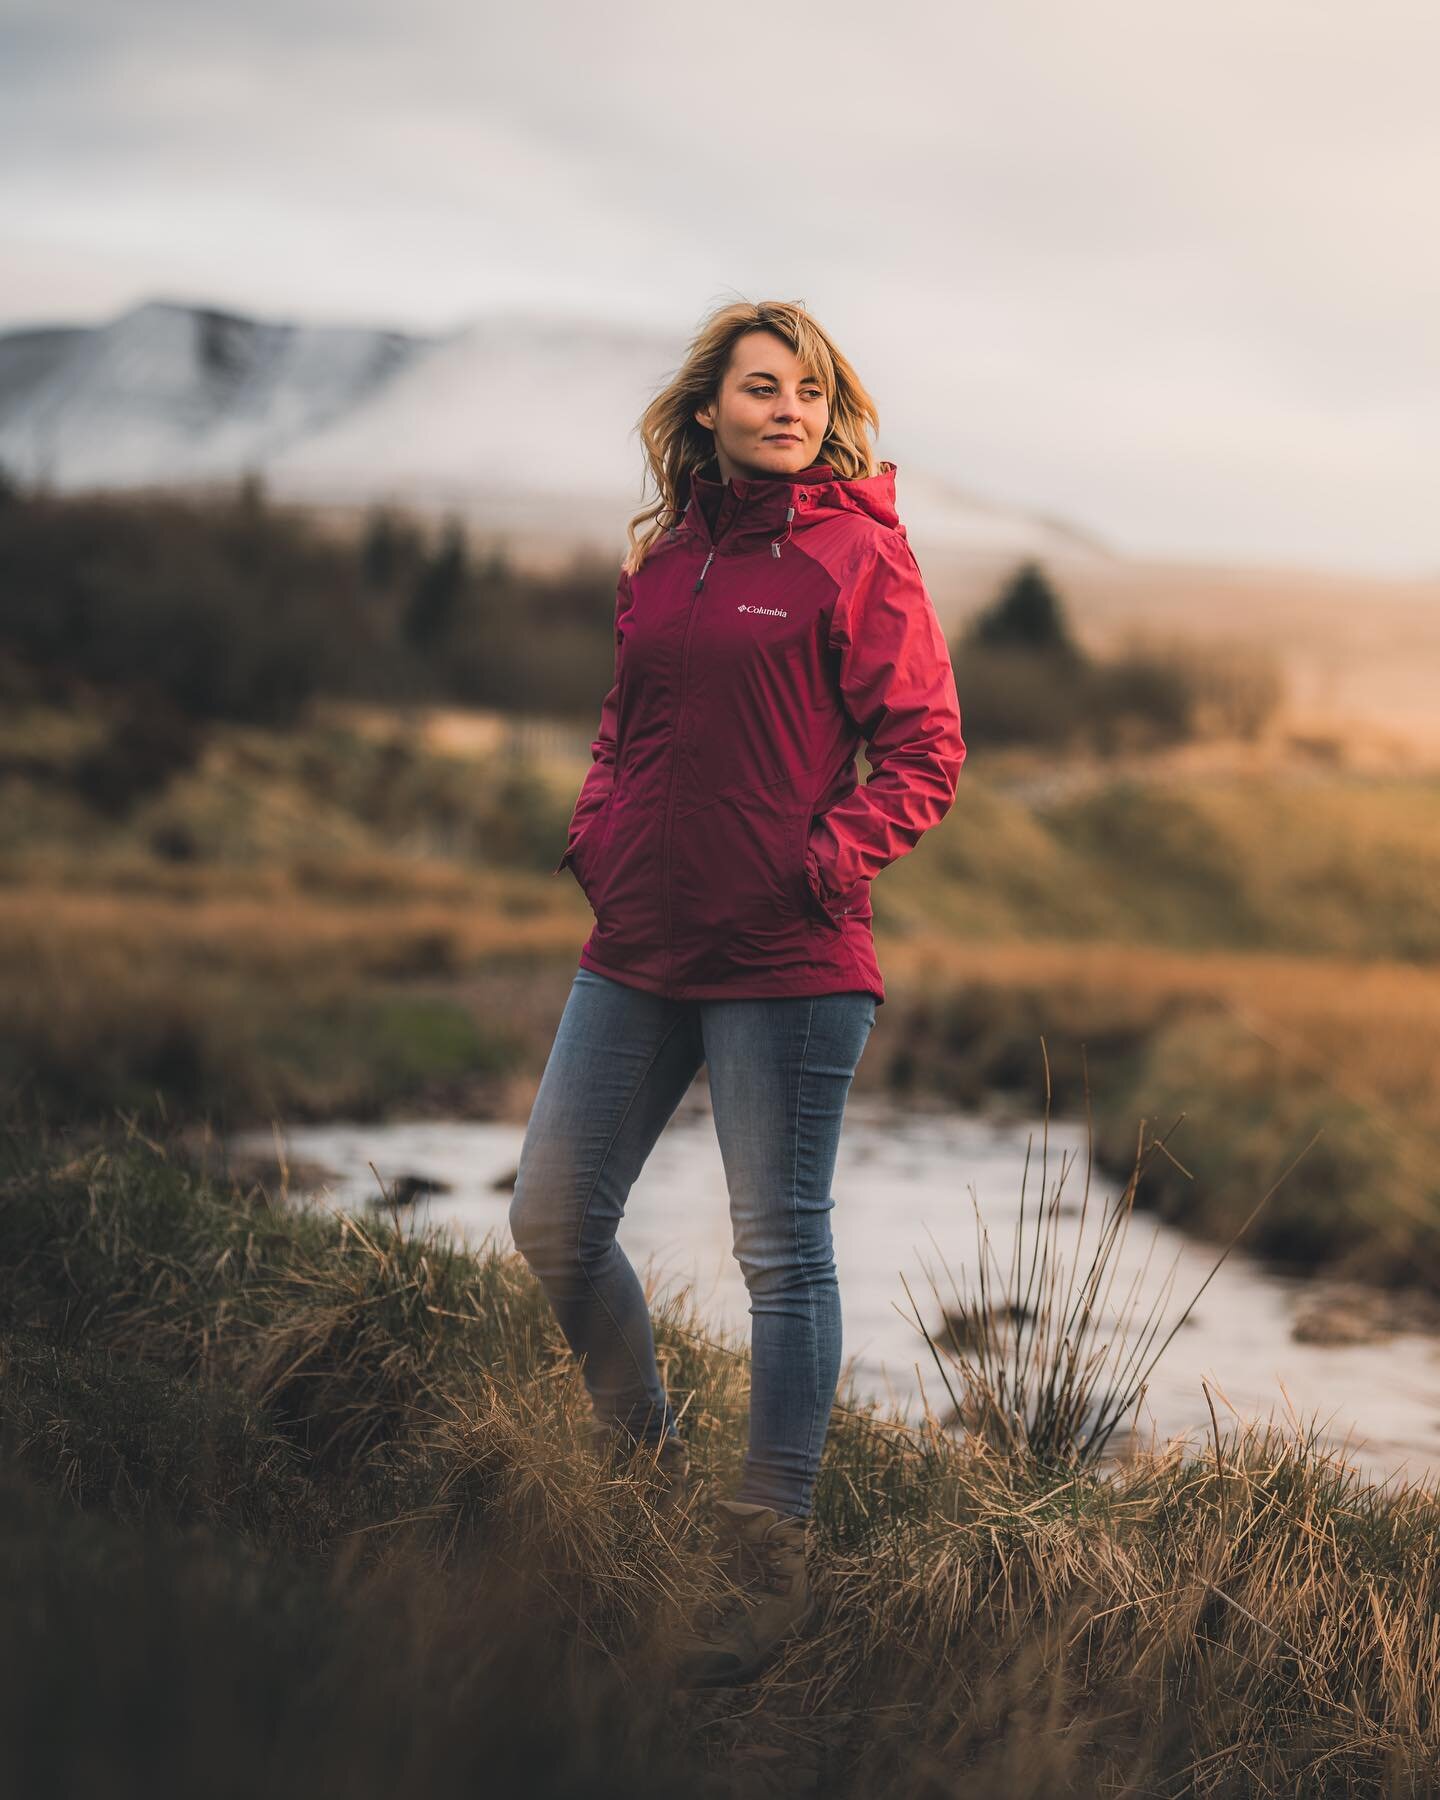 #ad | It&rsquo;s been so nice to explore some local areas of the western Brecon Beacons on weekday evenings recently. 

Big thank you to @columbia_eu // @cotswoldoutdoor for kitting us out with some new layers to visit our national parks and keep us 